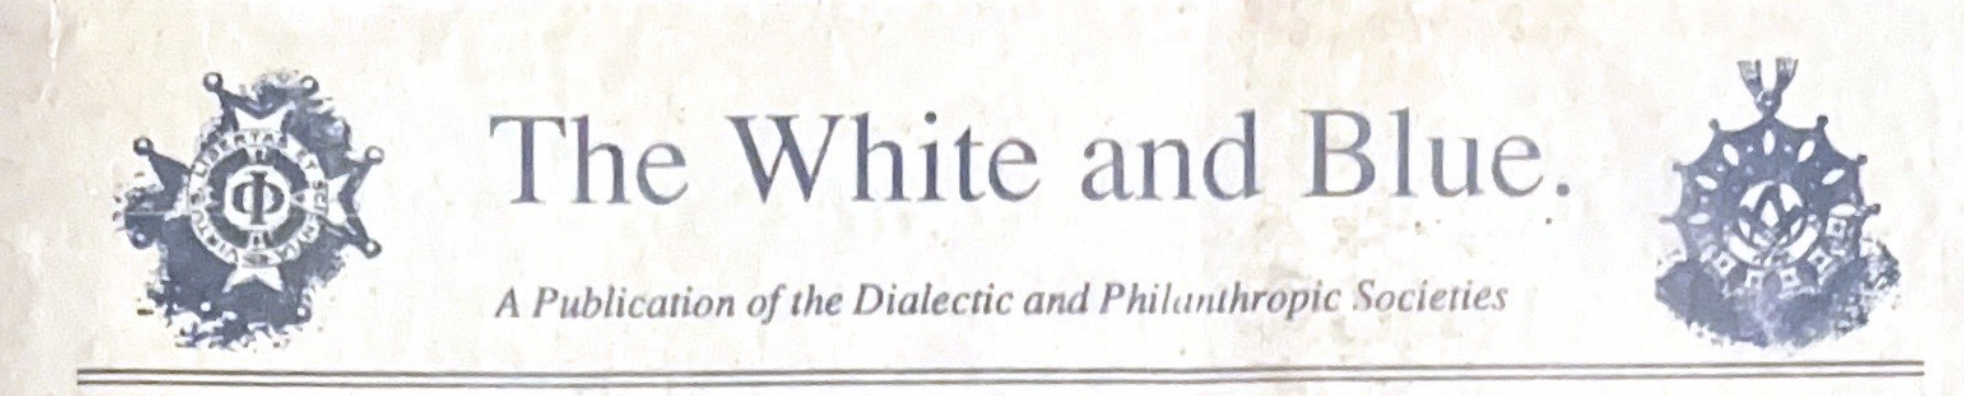 The White & Blue – The Dialectic and Philanthropic Societies